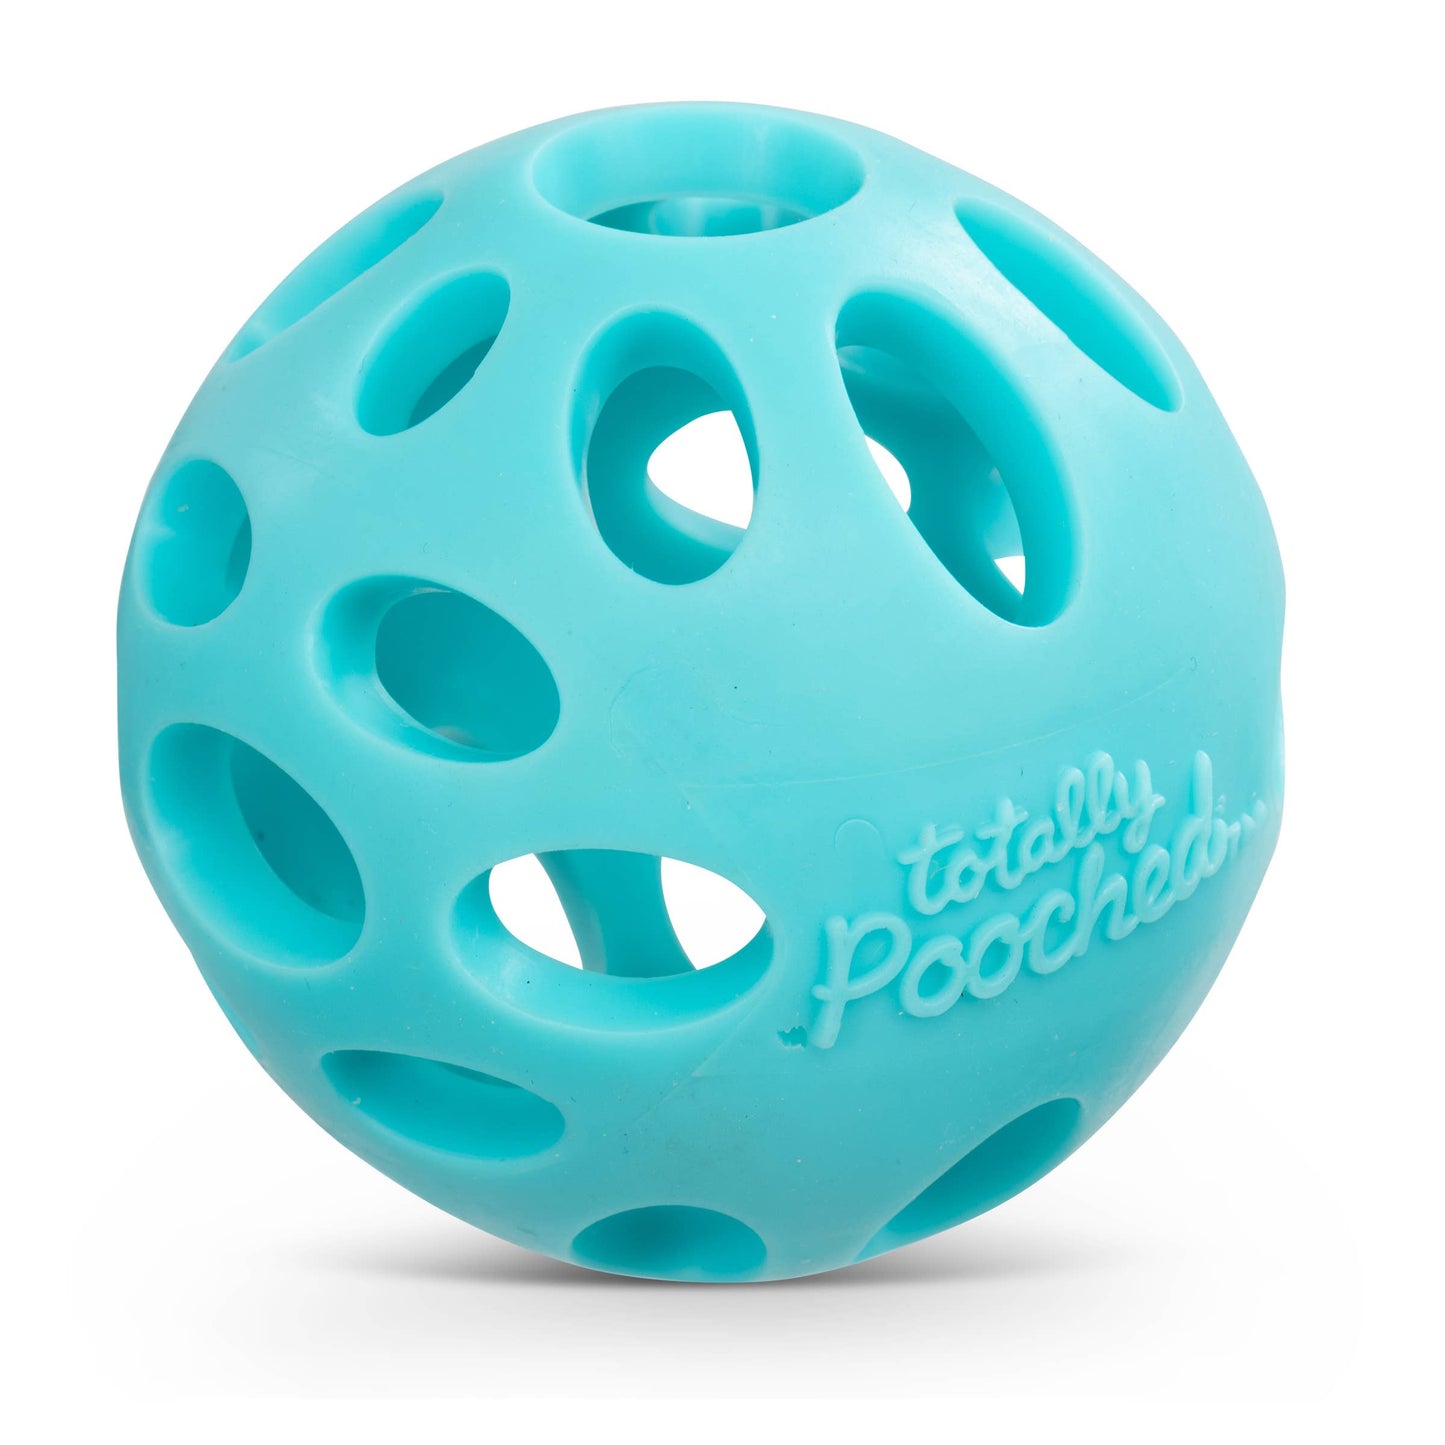 Totally Pooched Huff'n Puff Ball Rubber 2.5" Teal